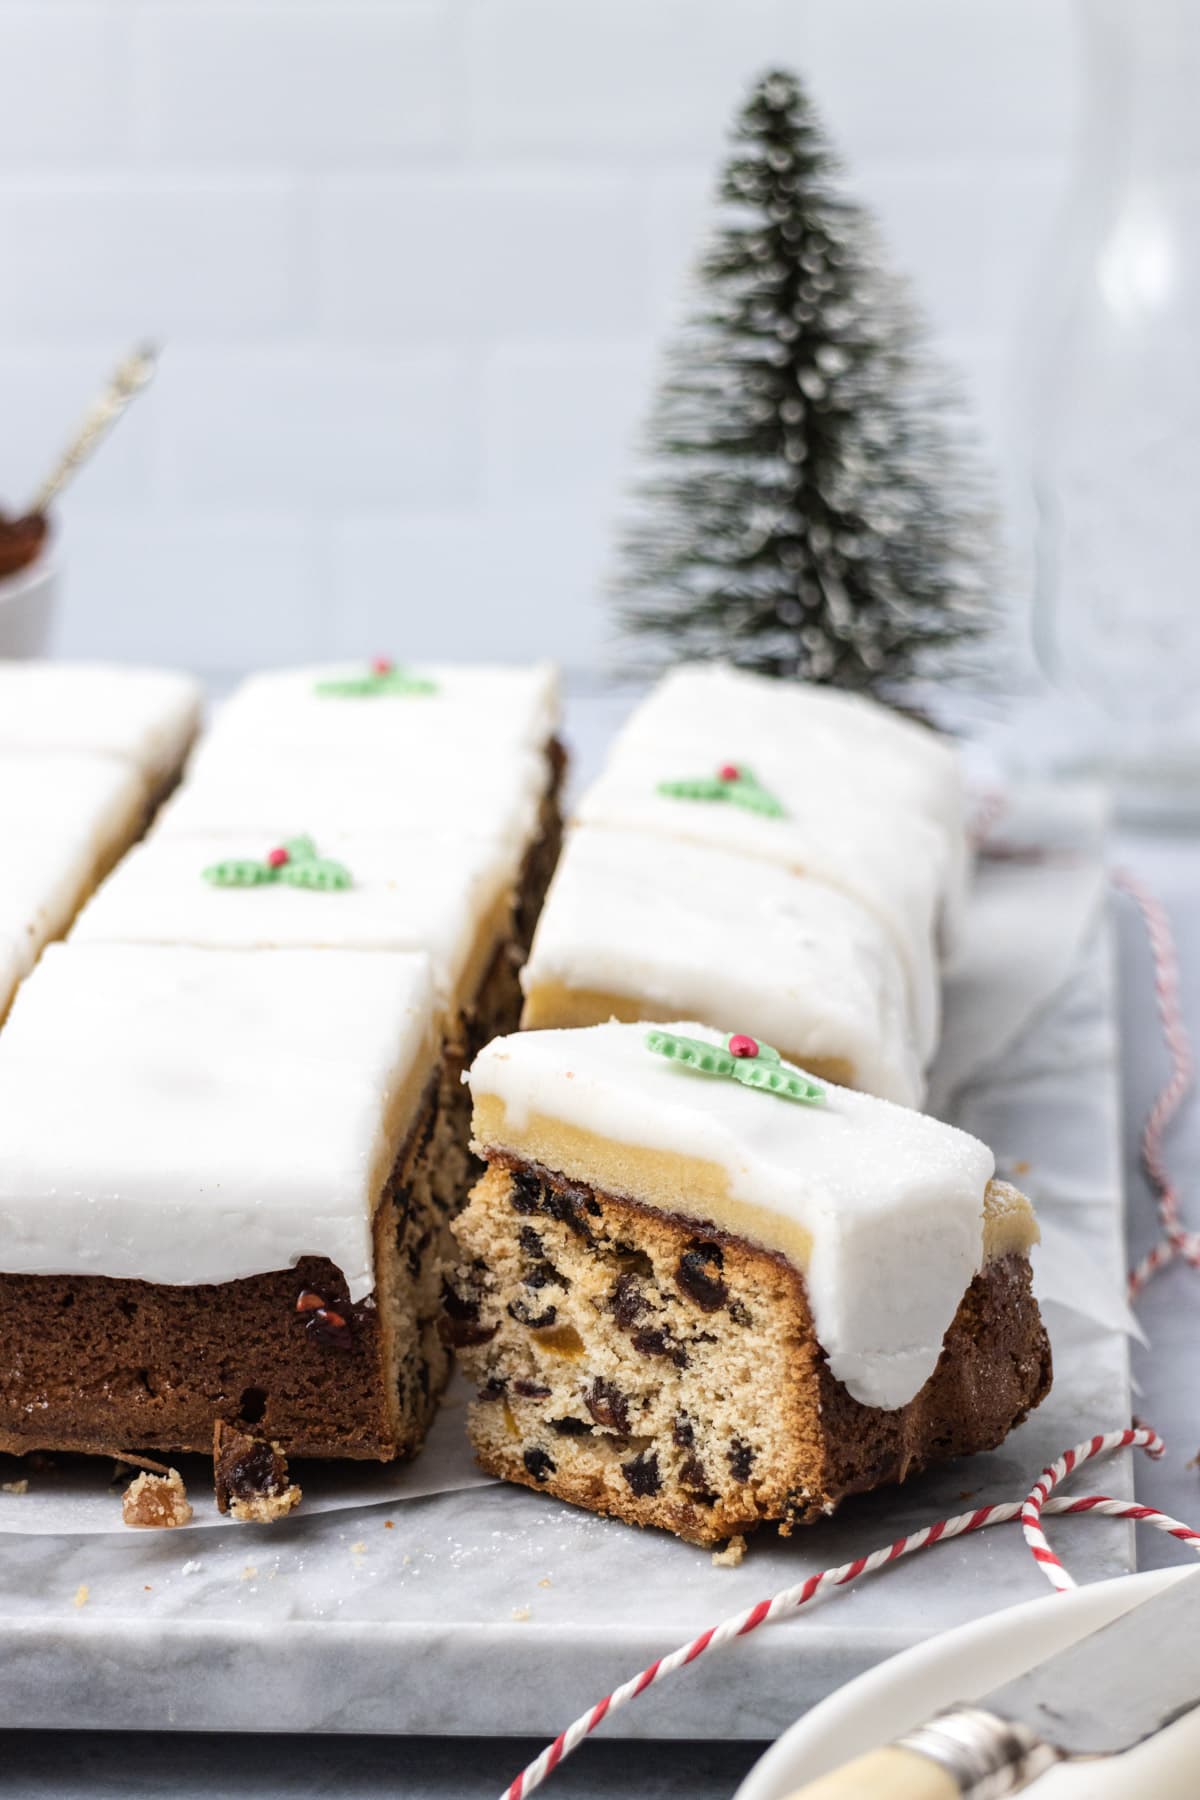 A square of light fruit cake iced with marizpan and white icing